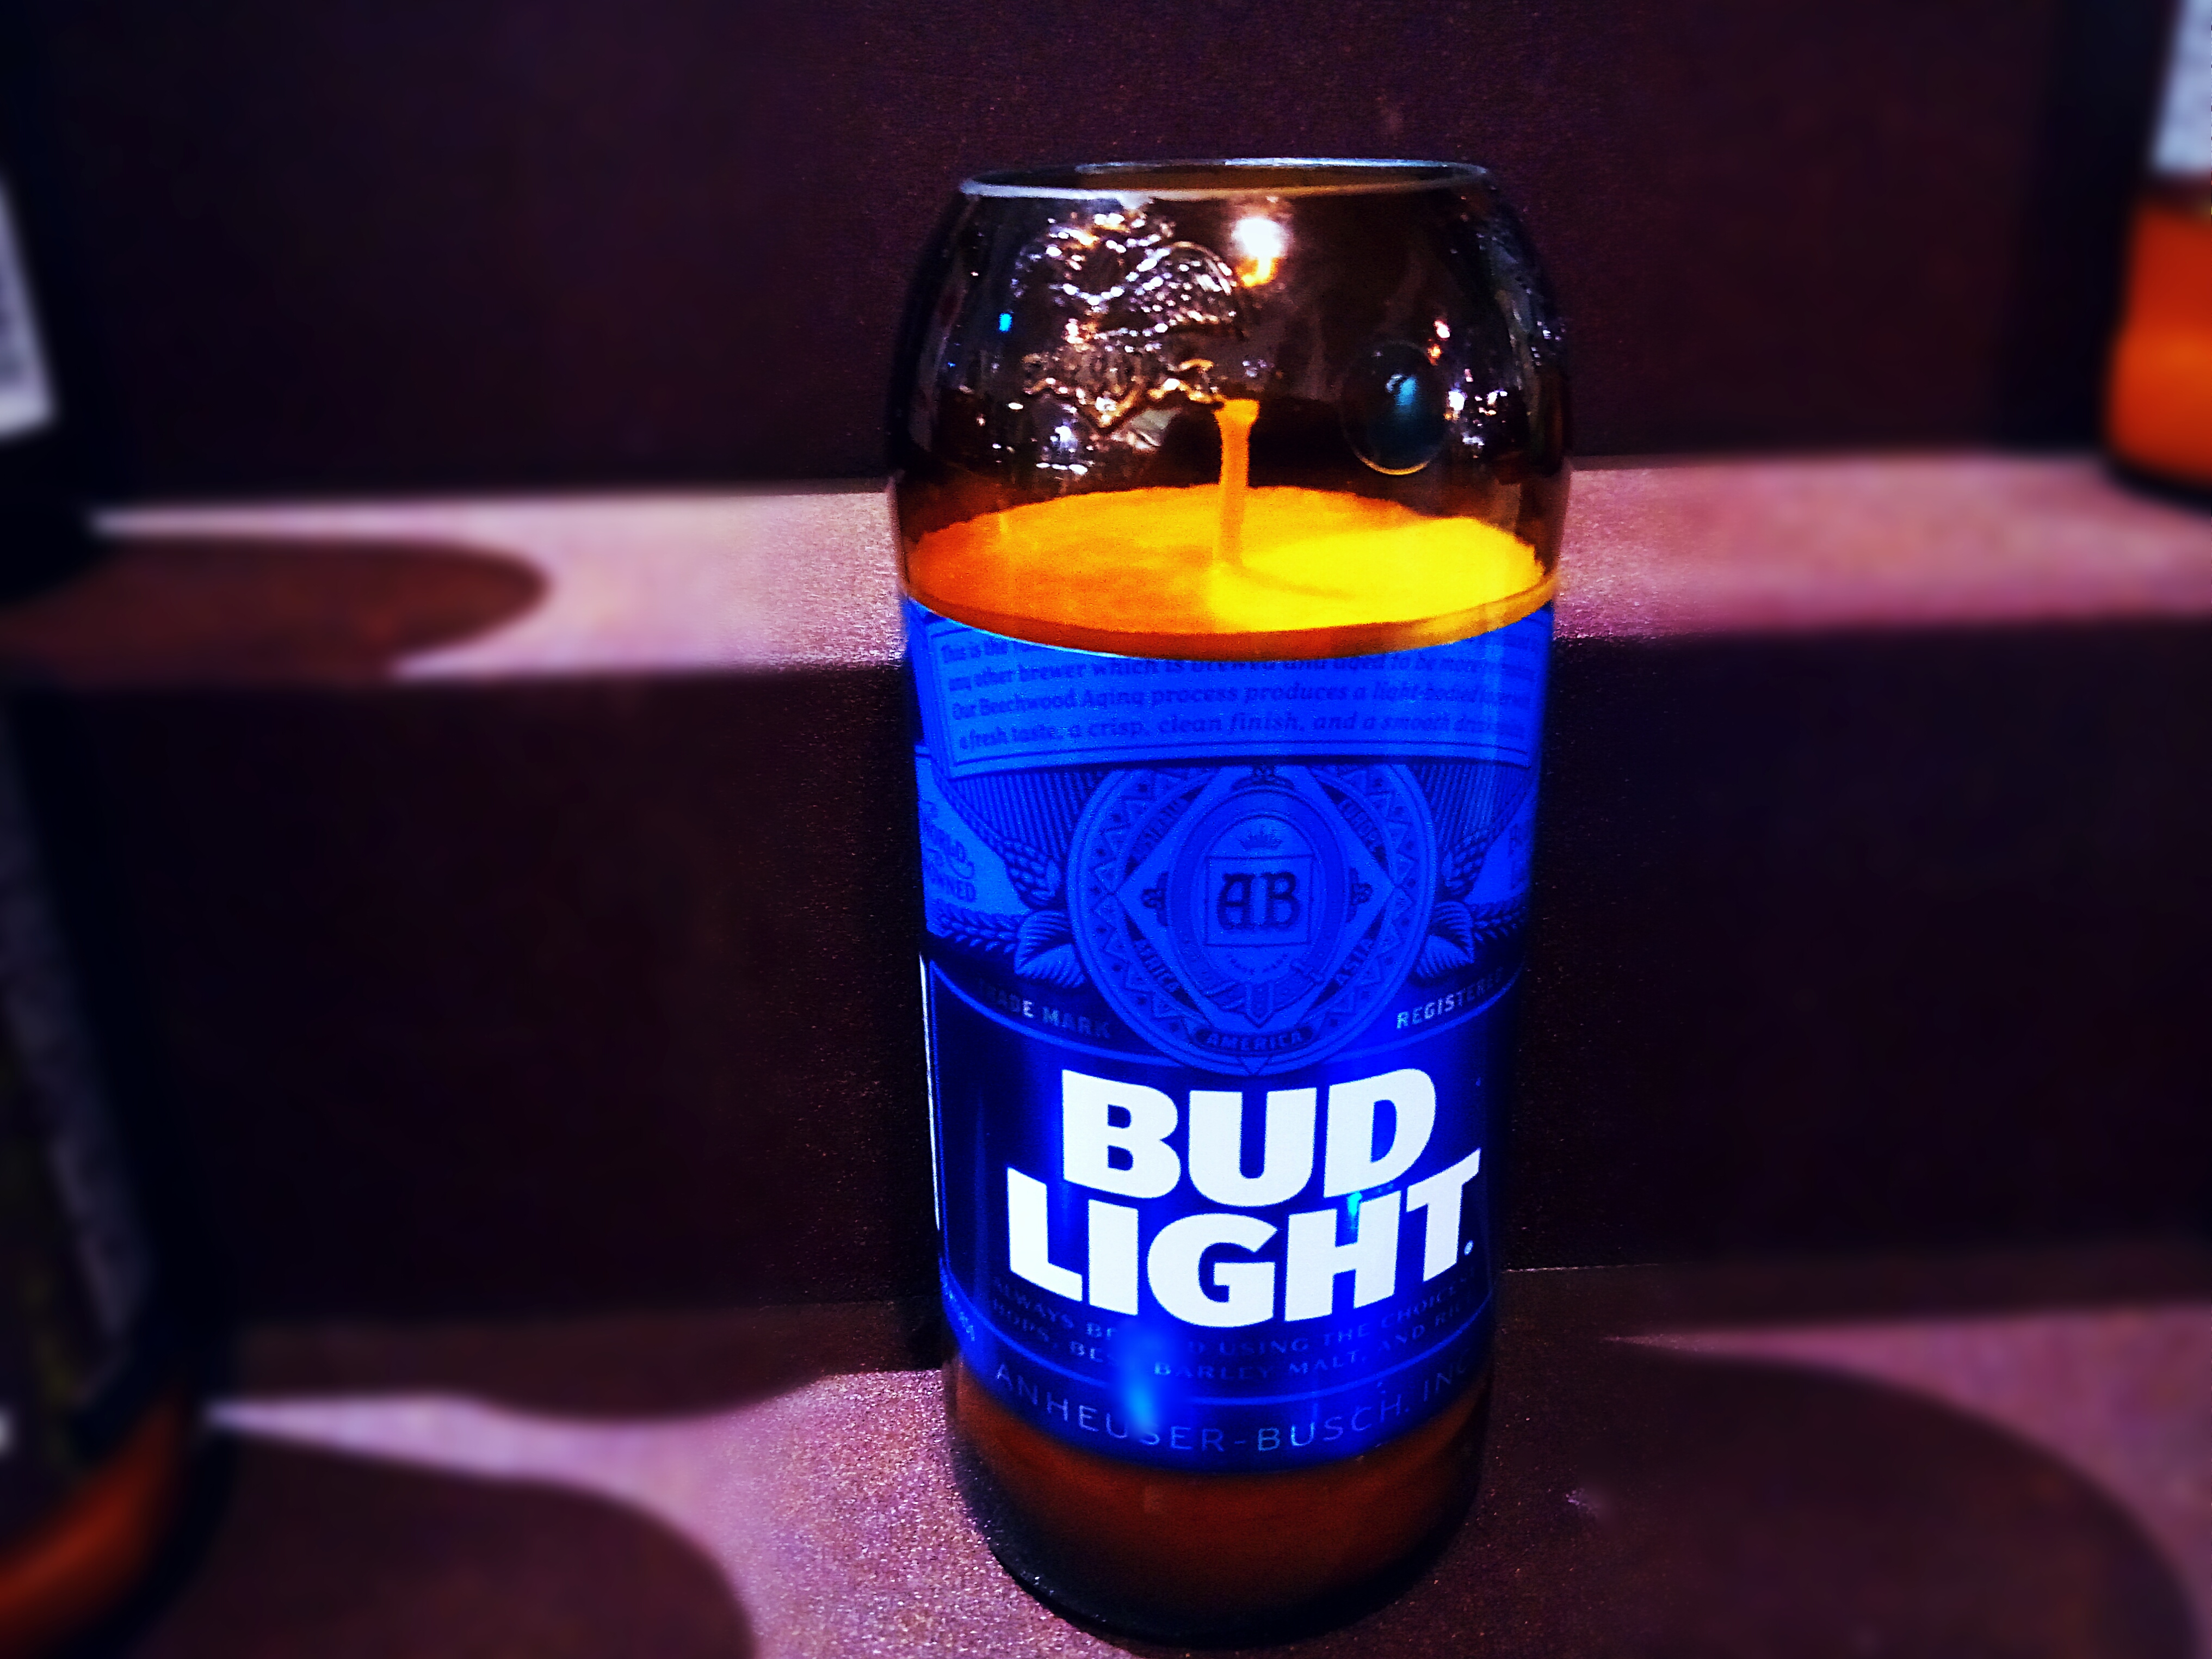 Custom Soy Upcycled Beer Bottle Container Candle-CORONA Extra La Cerveza